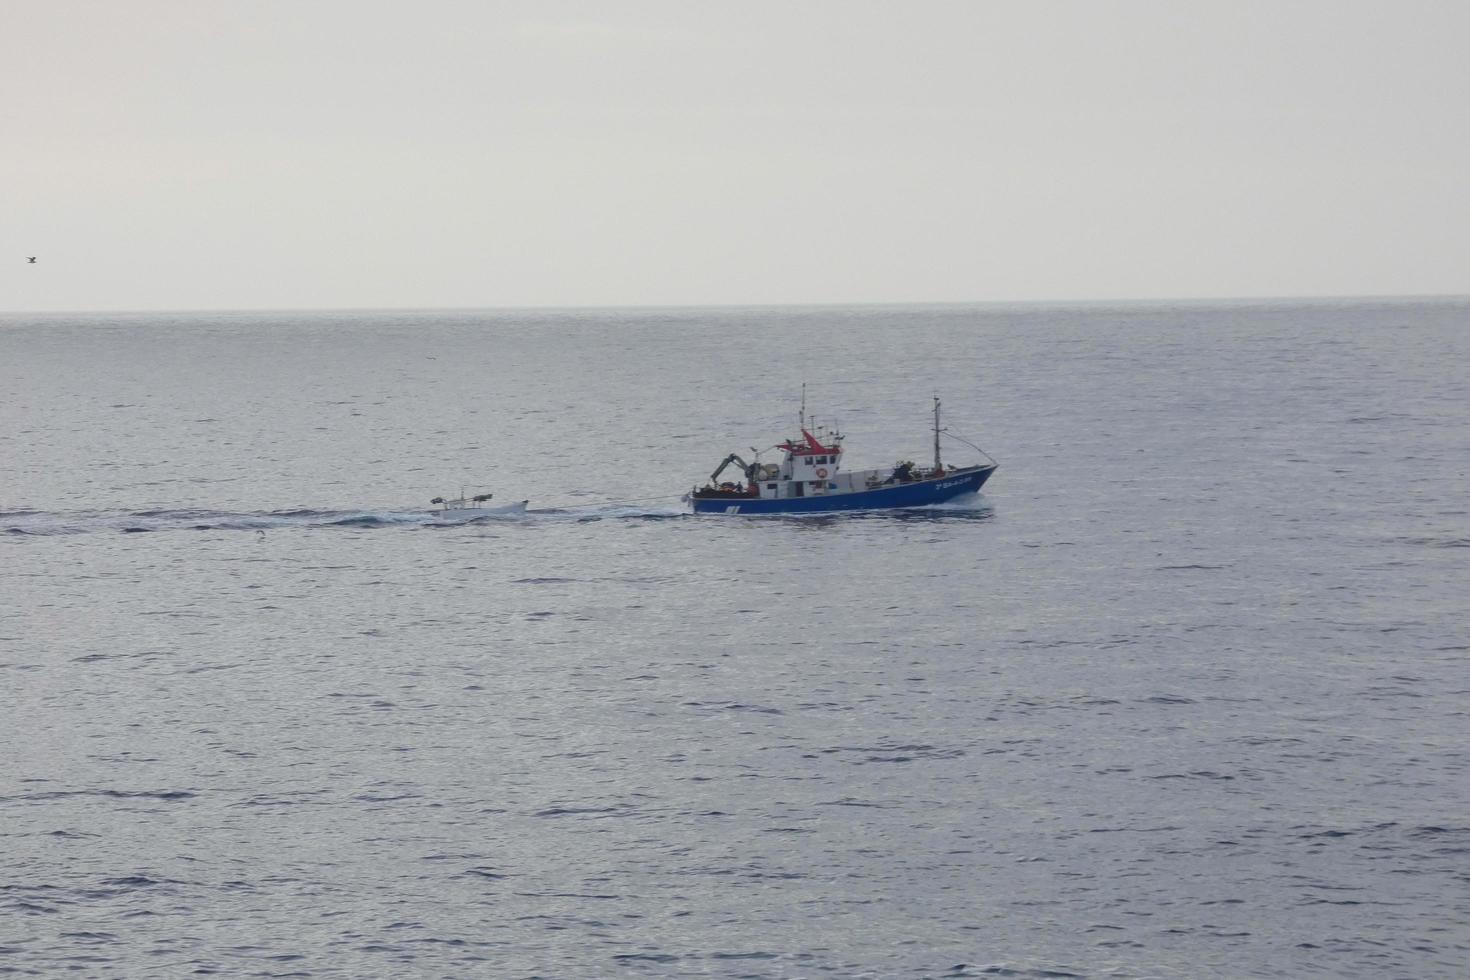 Fishing vessel returning from fishing in the Mediterranean Sea. photo